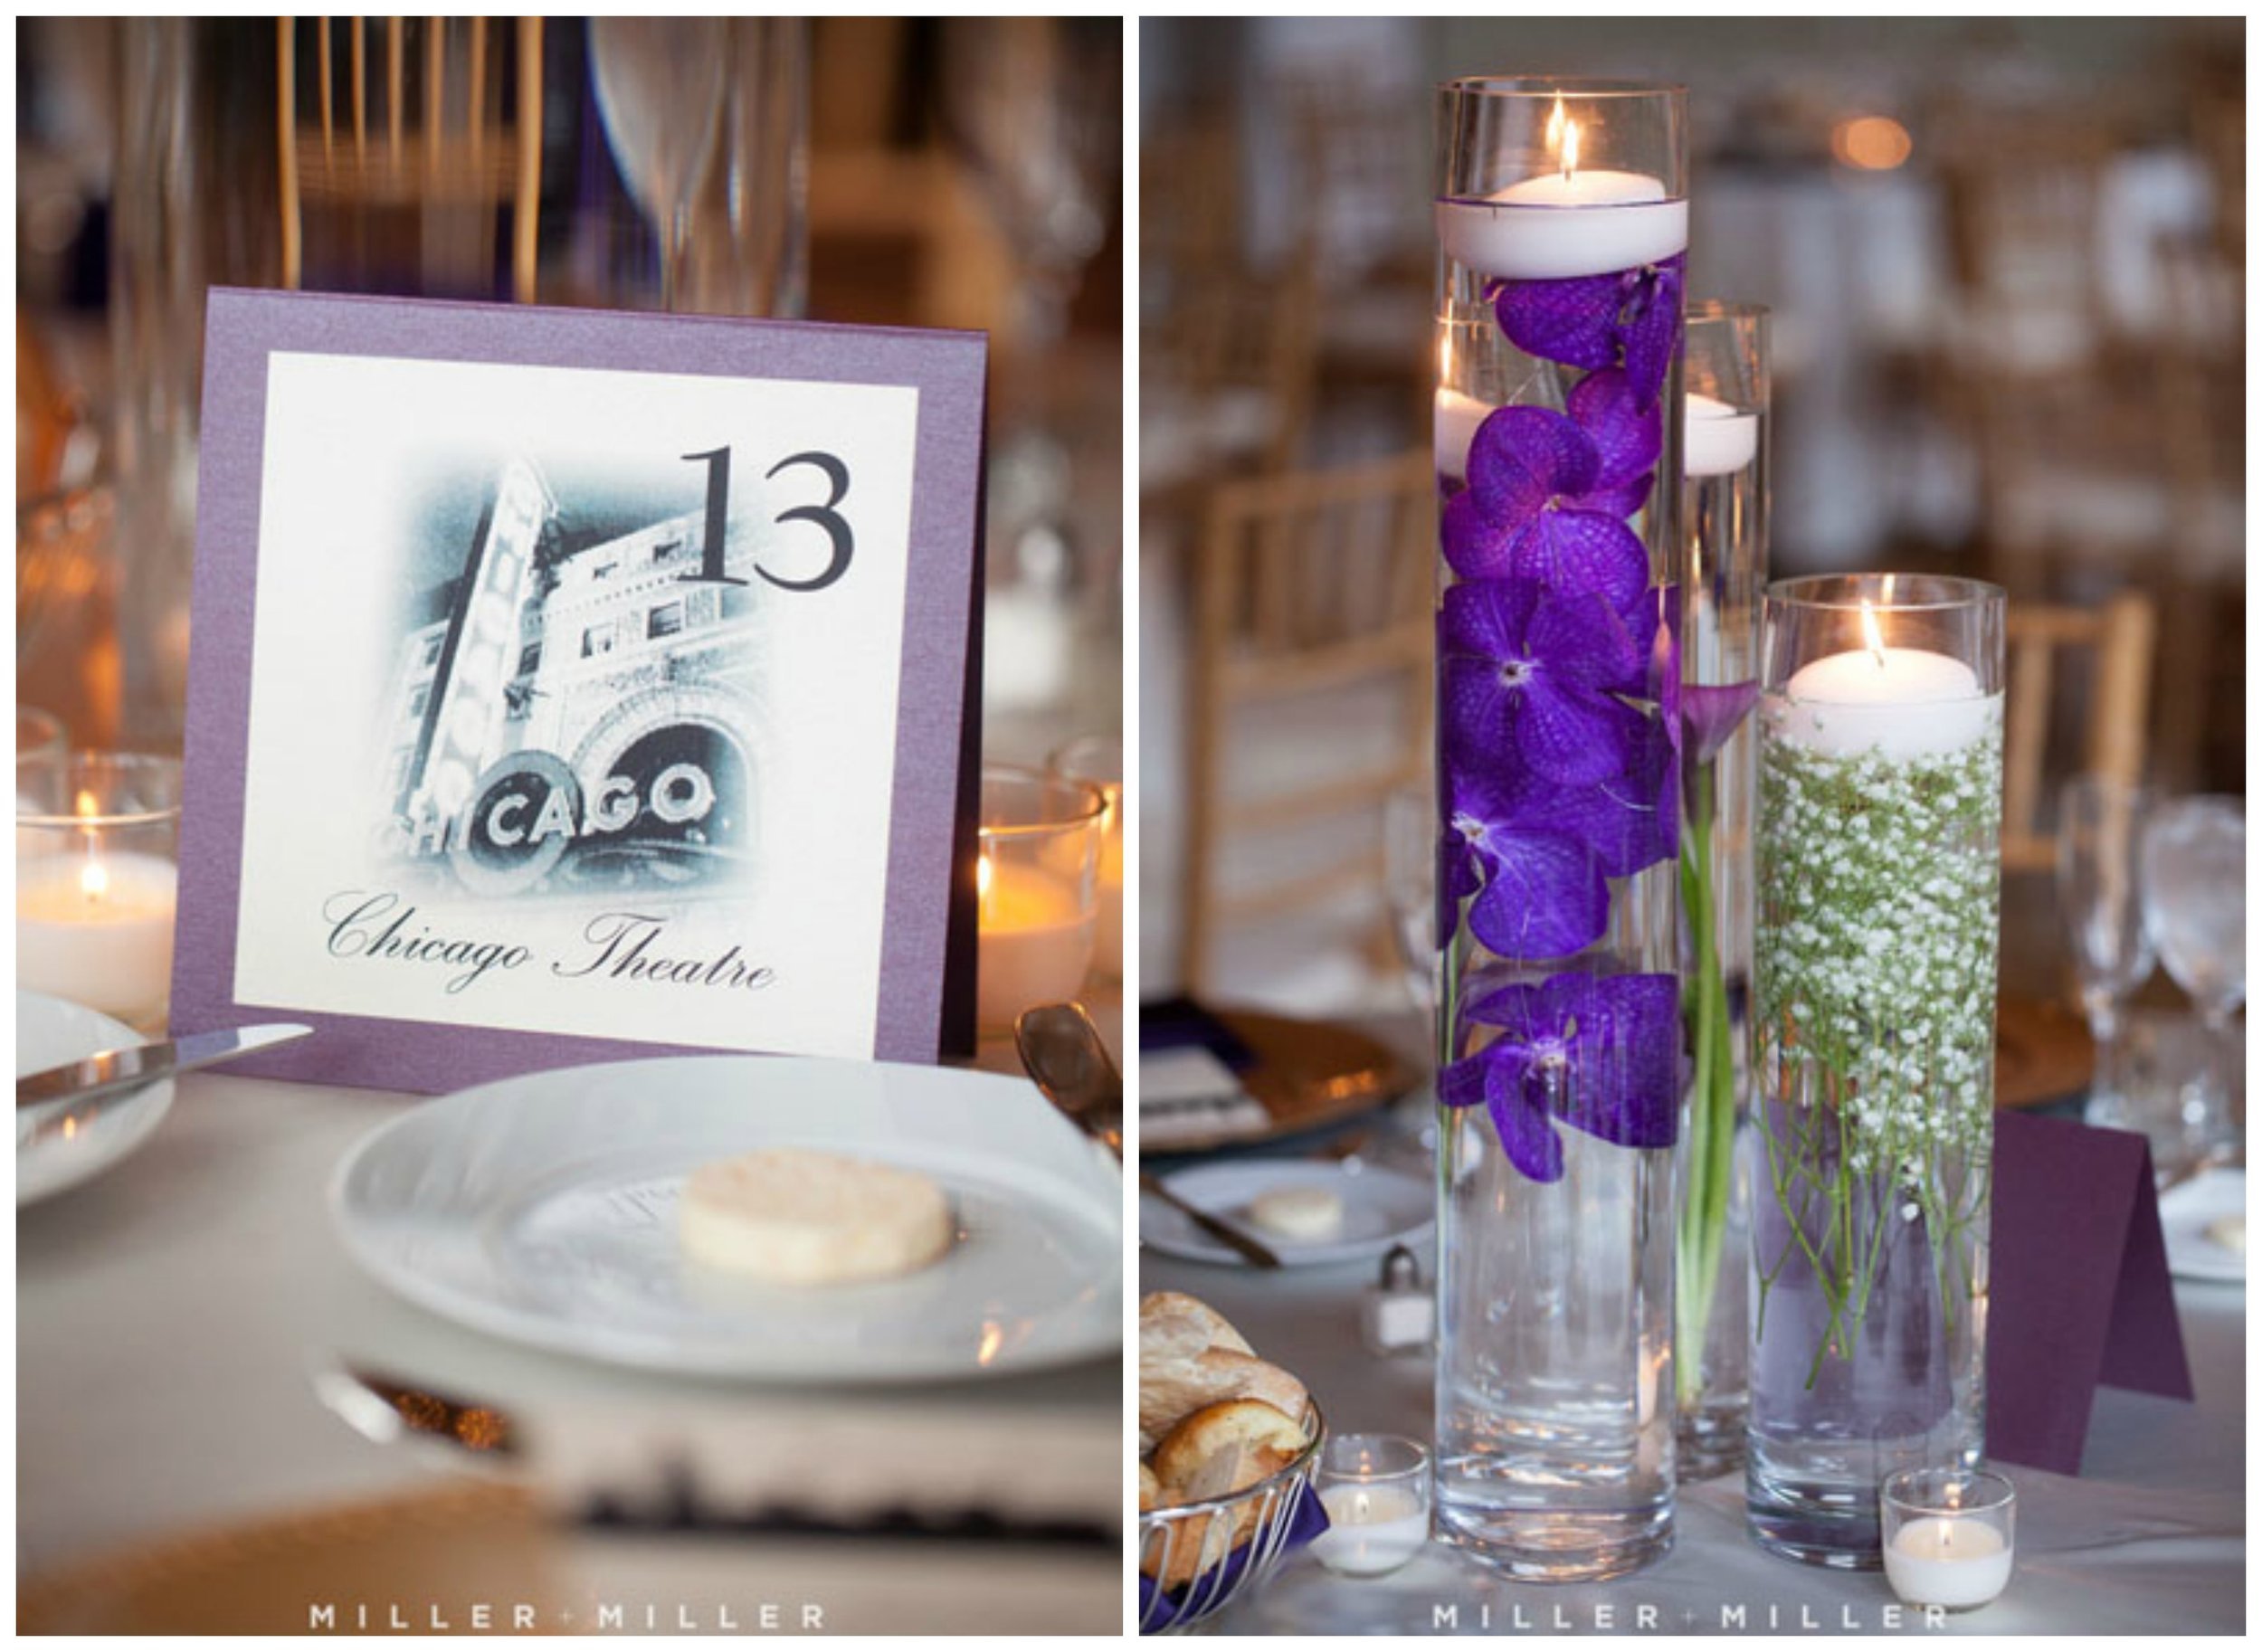 39.-Miller-Miller-Sweetchic-Events.-Vale-of-Enna.-Submerged-orchid-lilies-and-babys-breath-centerpiece.picmonkey.jpg